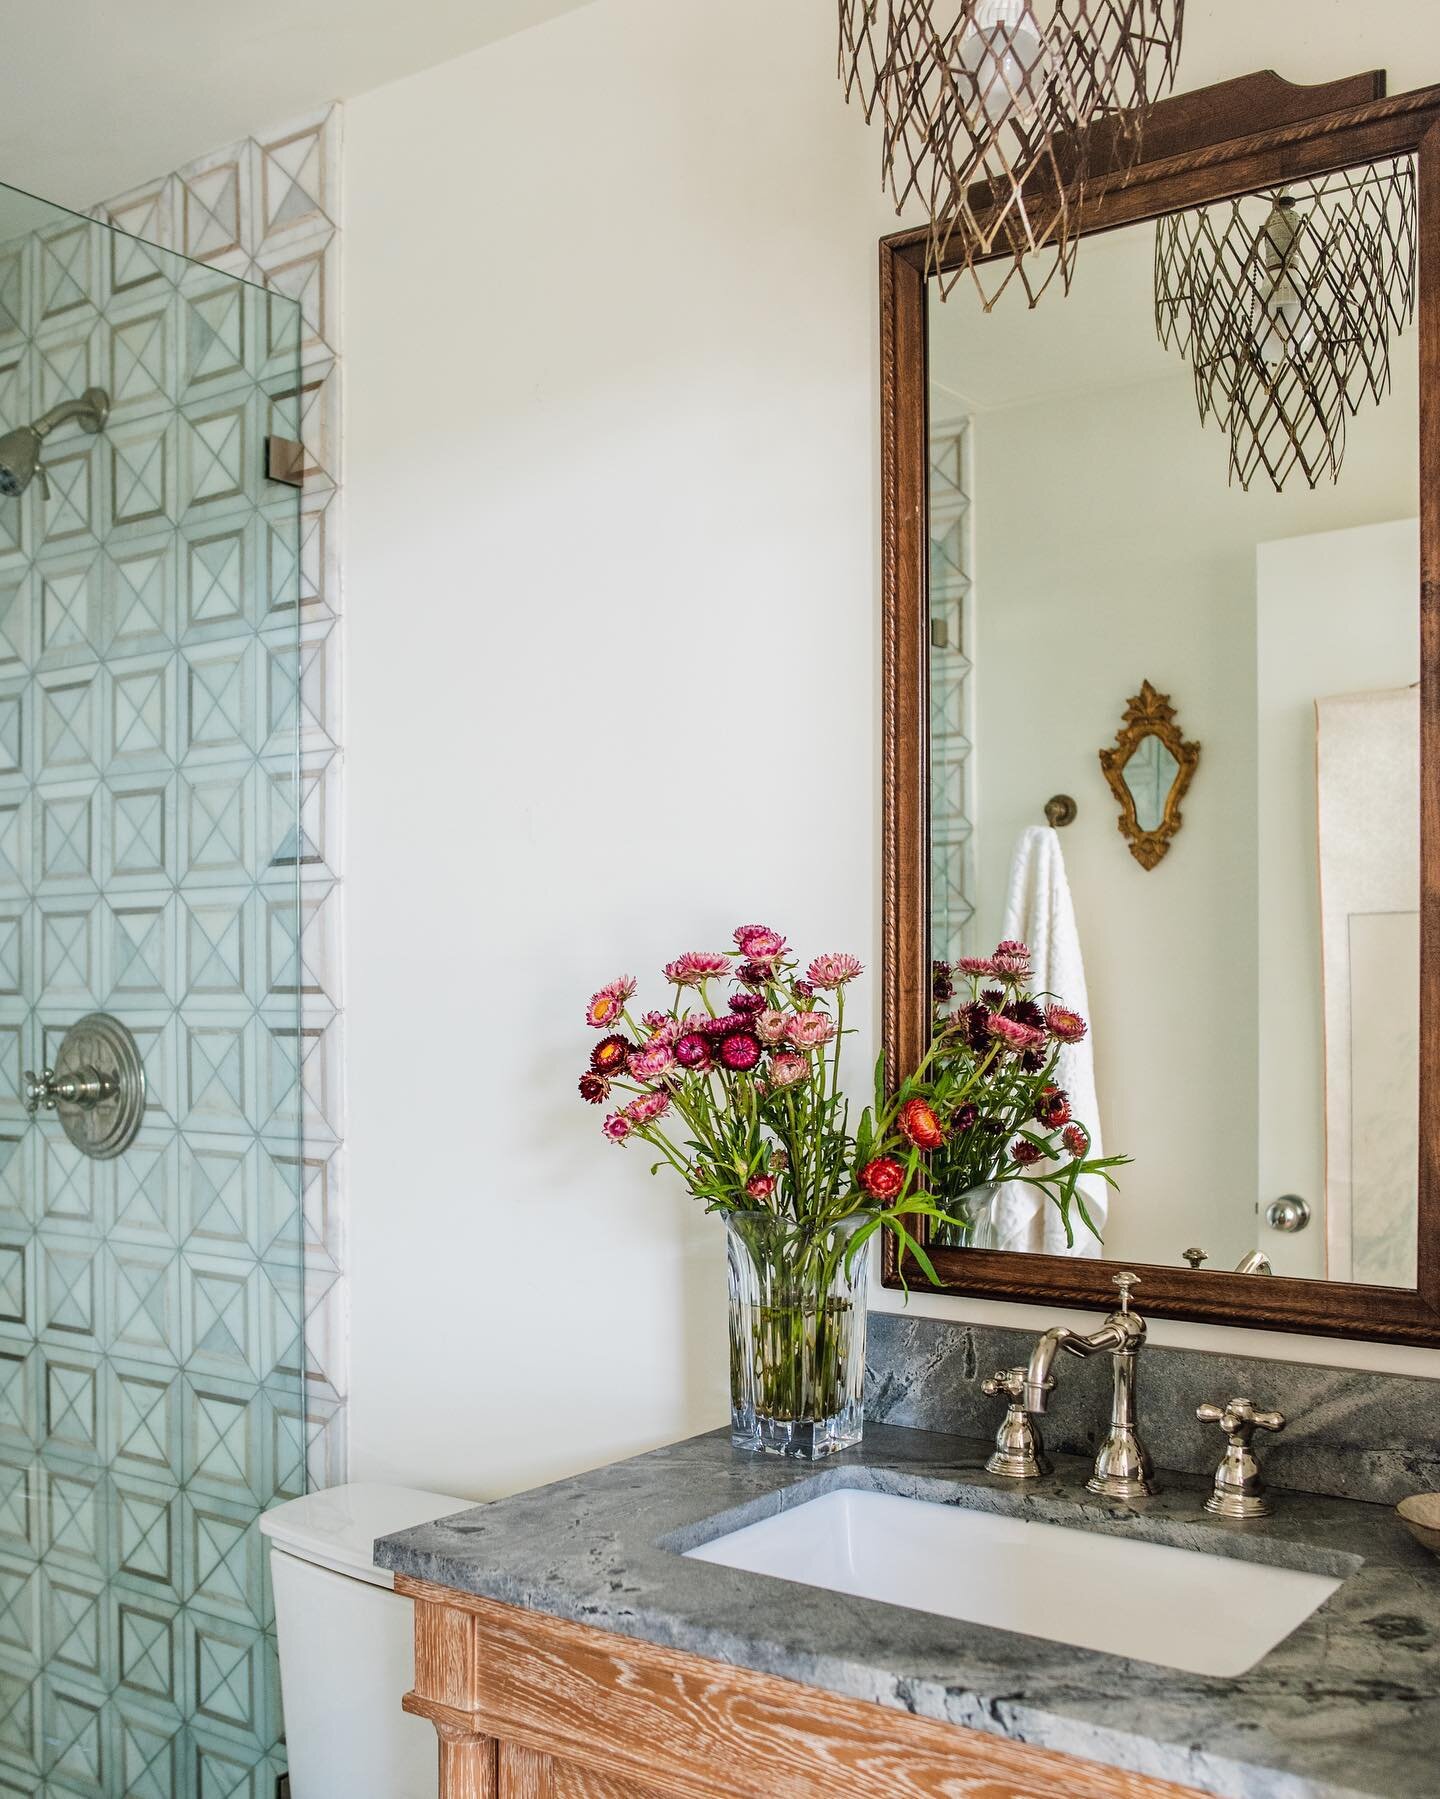 One of several #bathrooms we remodeled at #StanfordHouse. We kept it sweet and a bit rustic but included a jazzy statement tile for a punch. The pendant light was a vintage mystery something that we found while antique shopping in our hometown @kingr